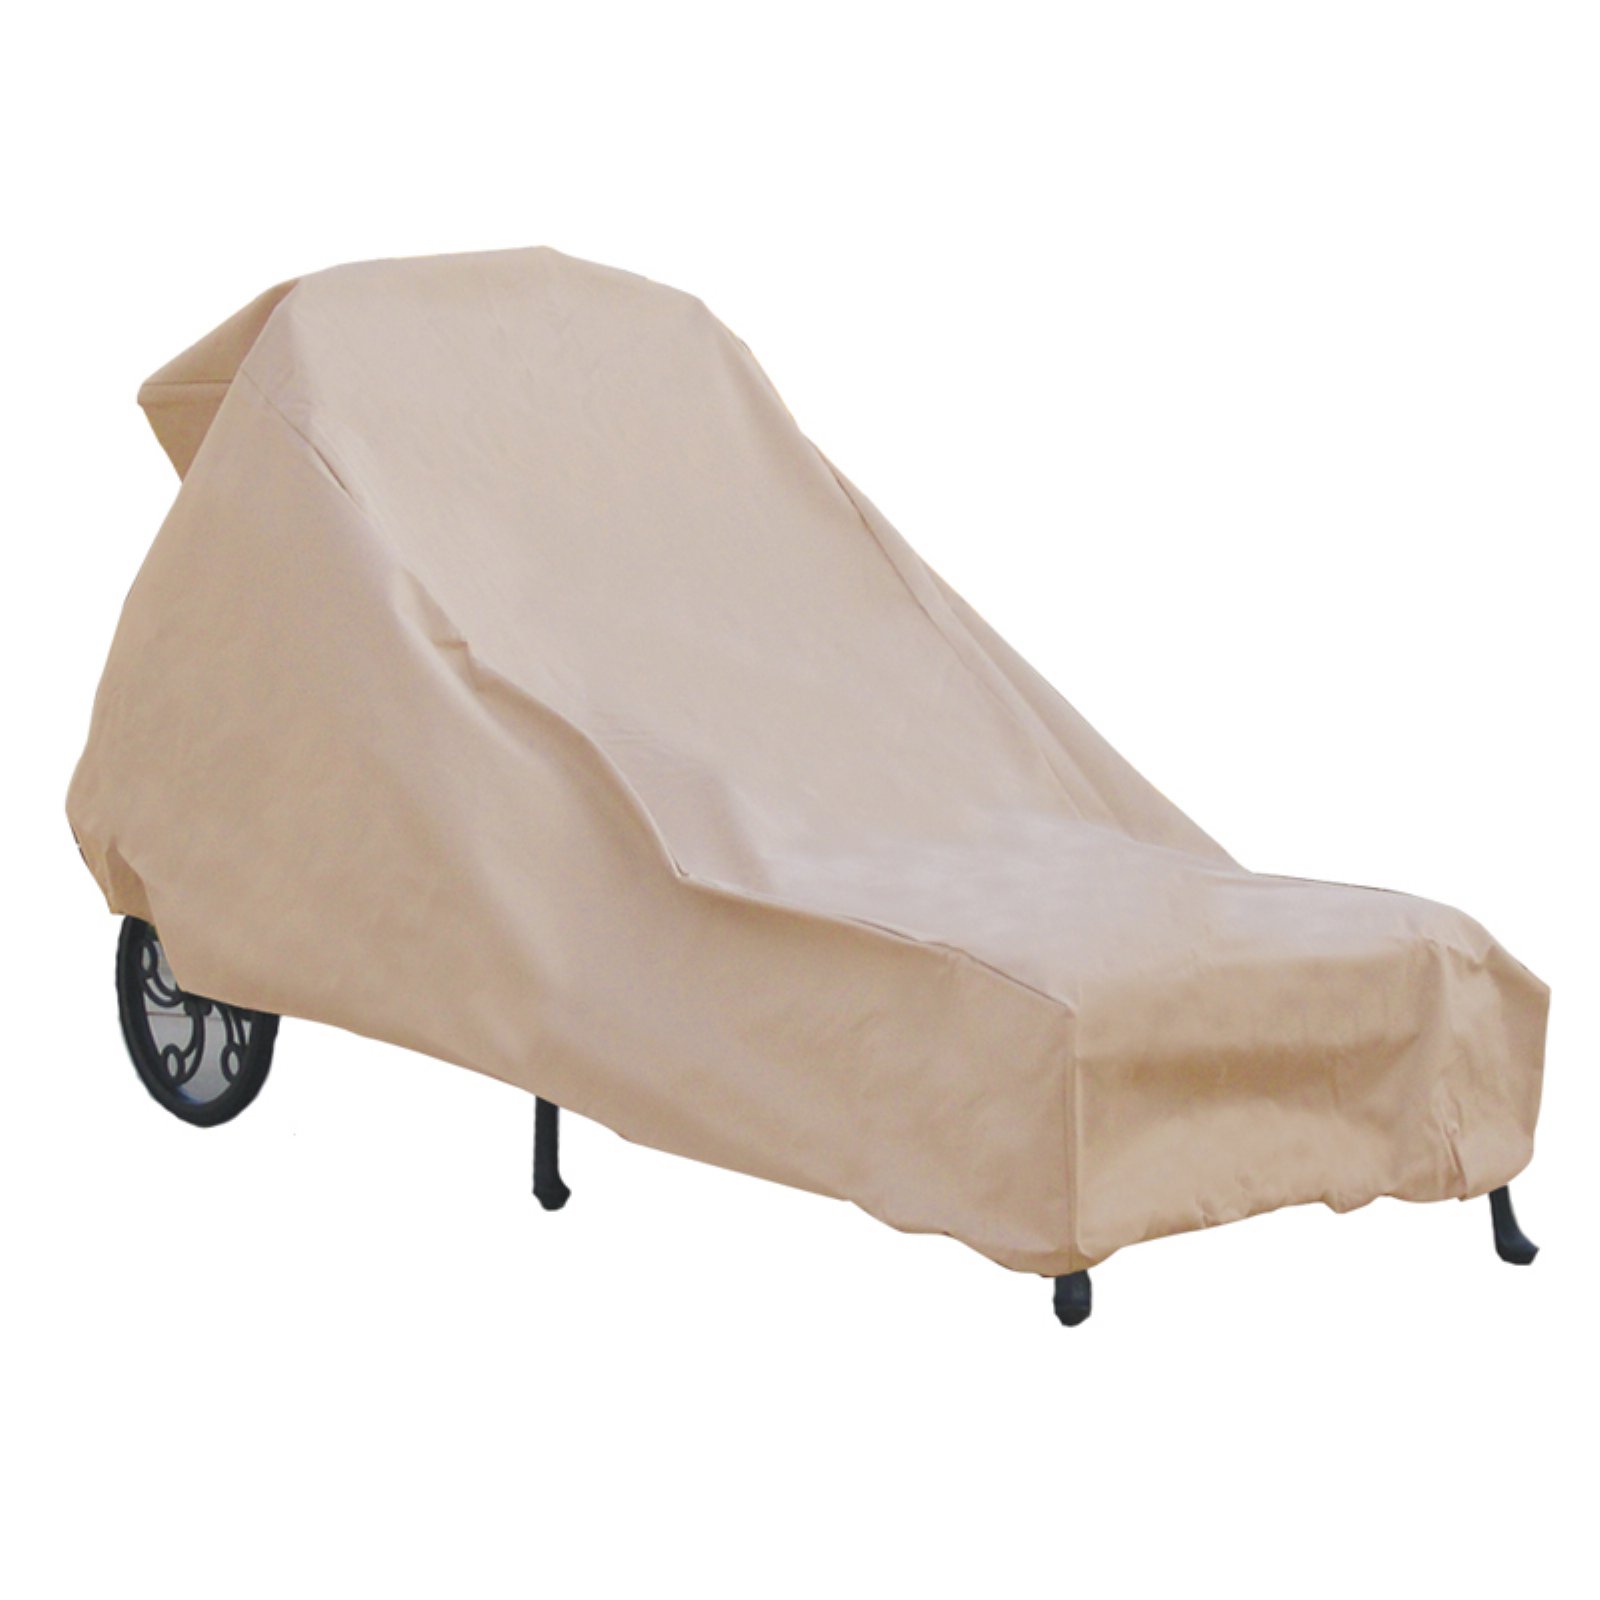 Hearth & Garden SF40236 Patio Chaise Lounge Cover - image 1 of 2